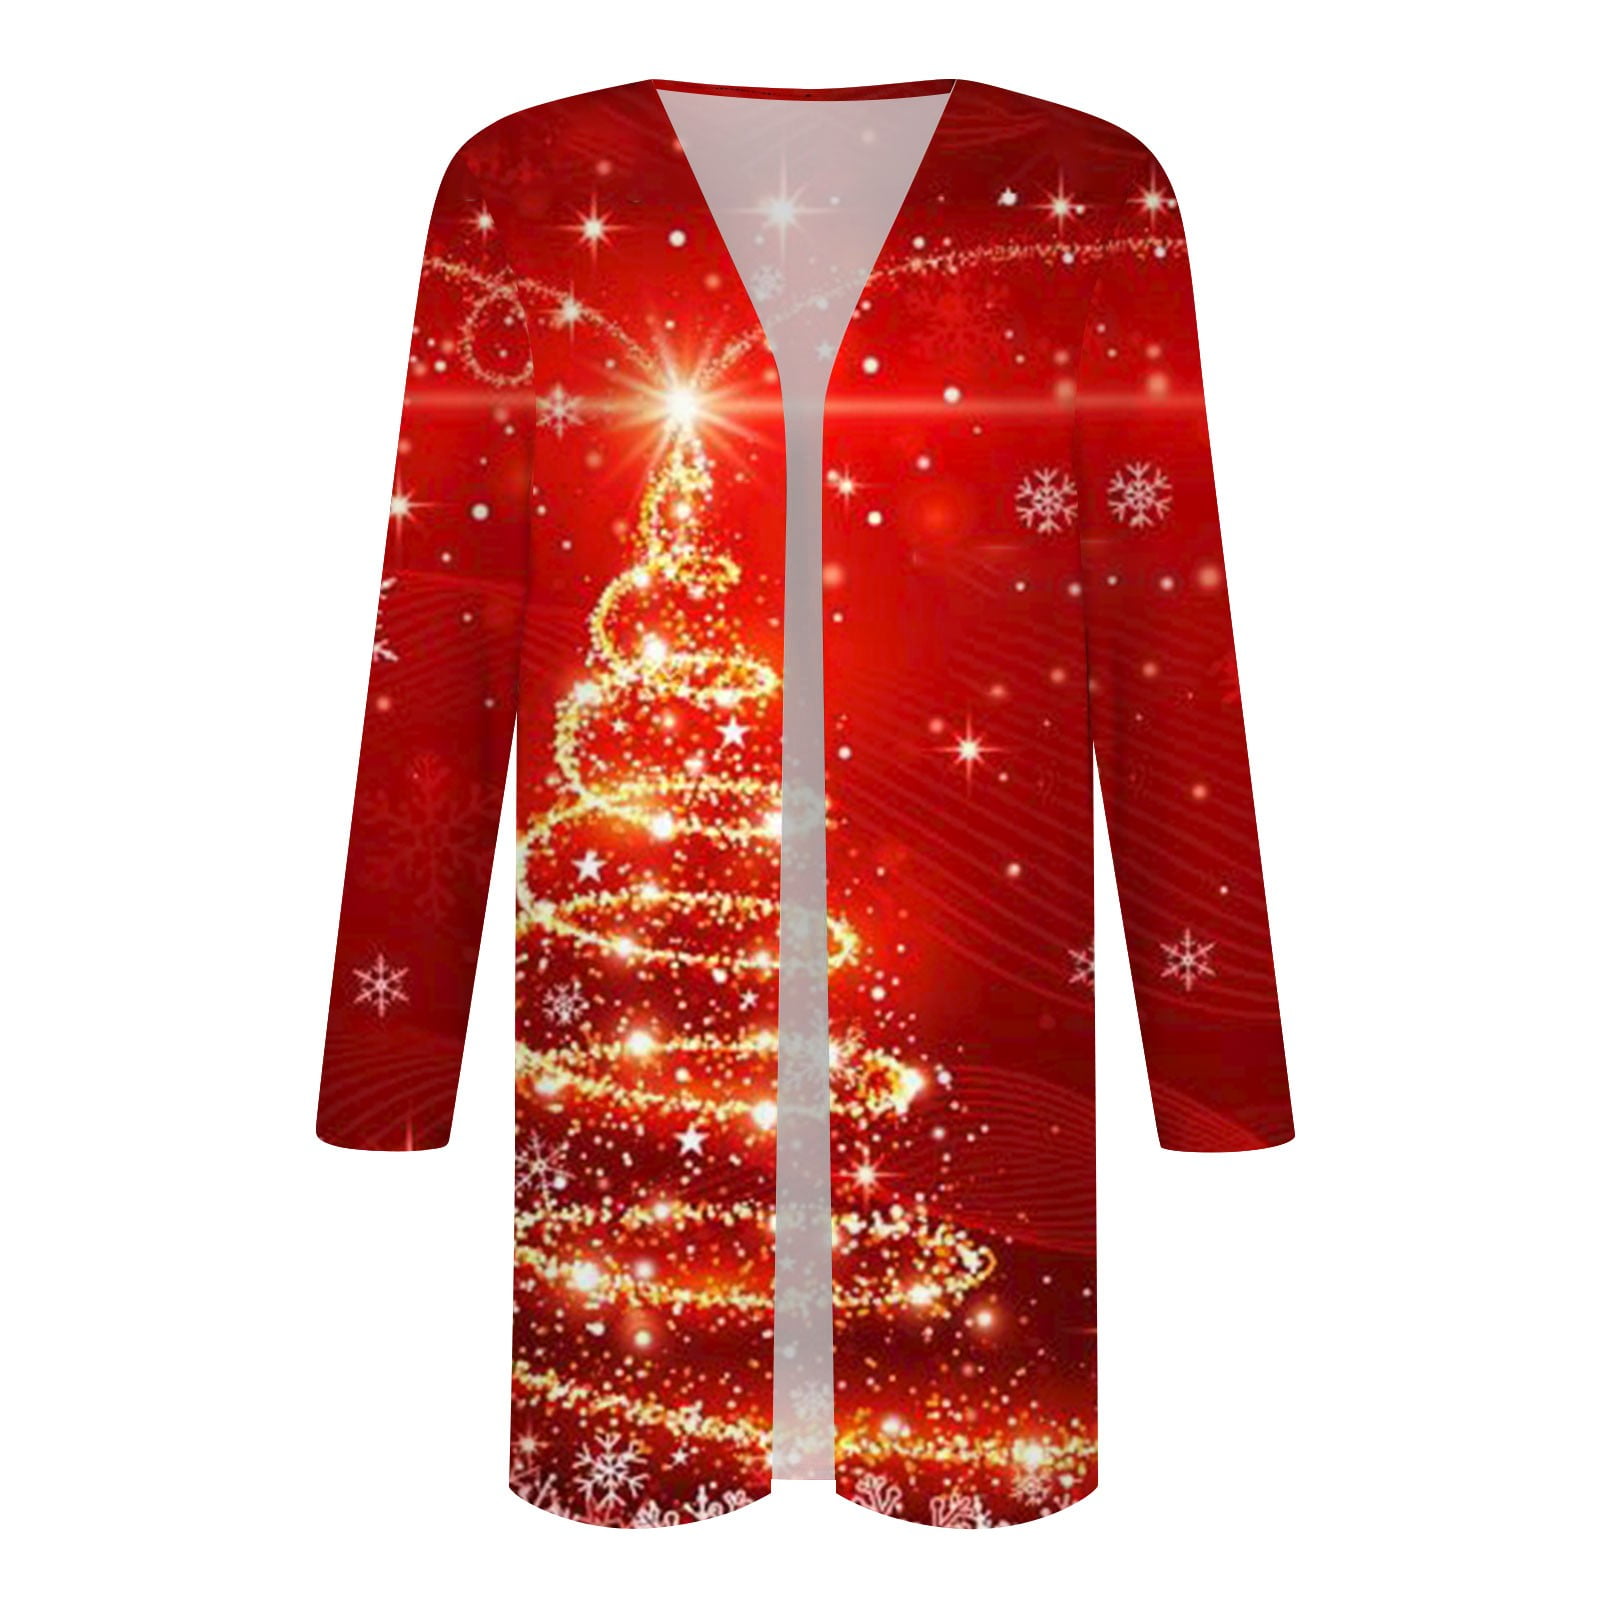 Women for Cardigan Cardigan Long Susanny Oversized Lightweight Work Christmas Open Clothes Women Size Front Tree Women Christmas Plus Size Sleeve for 3XL for Christmas Red Warm Plus Print Y2k